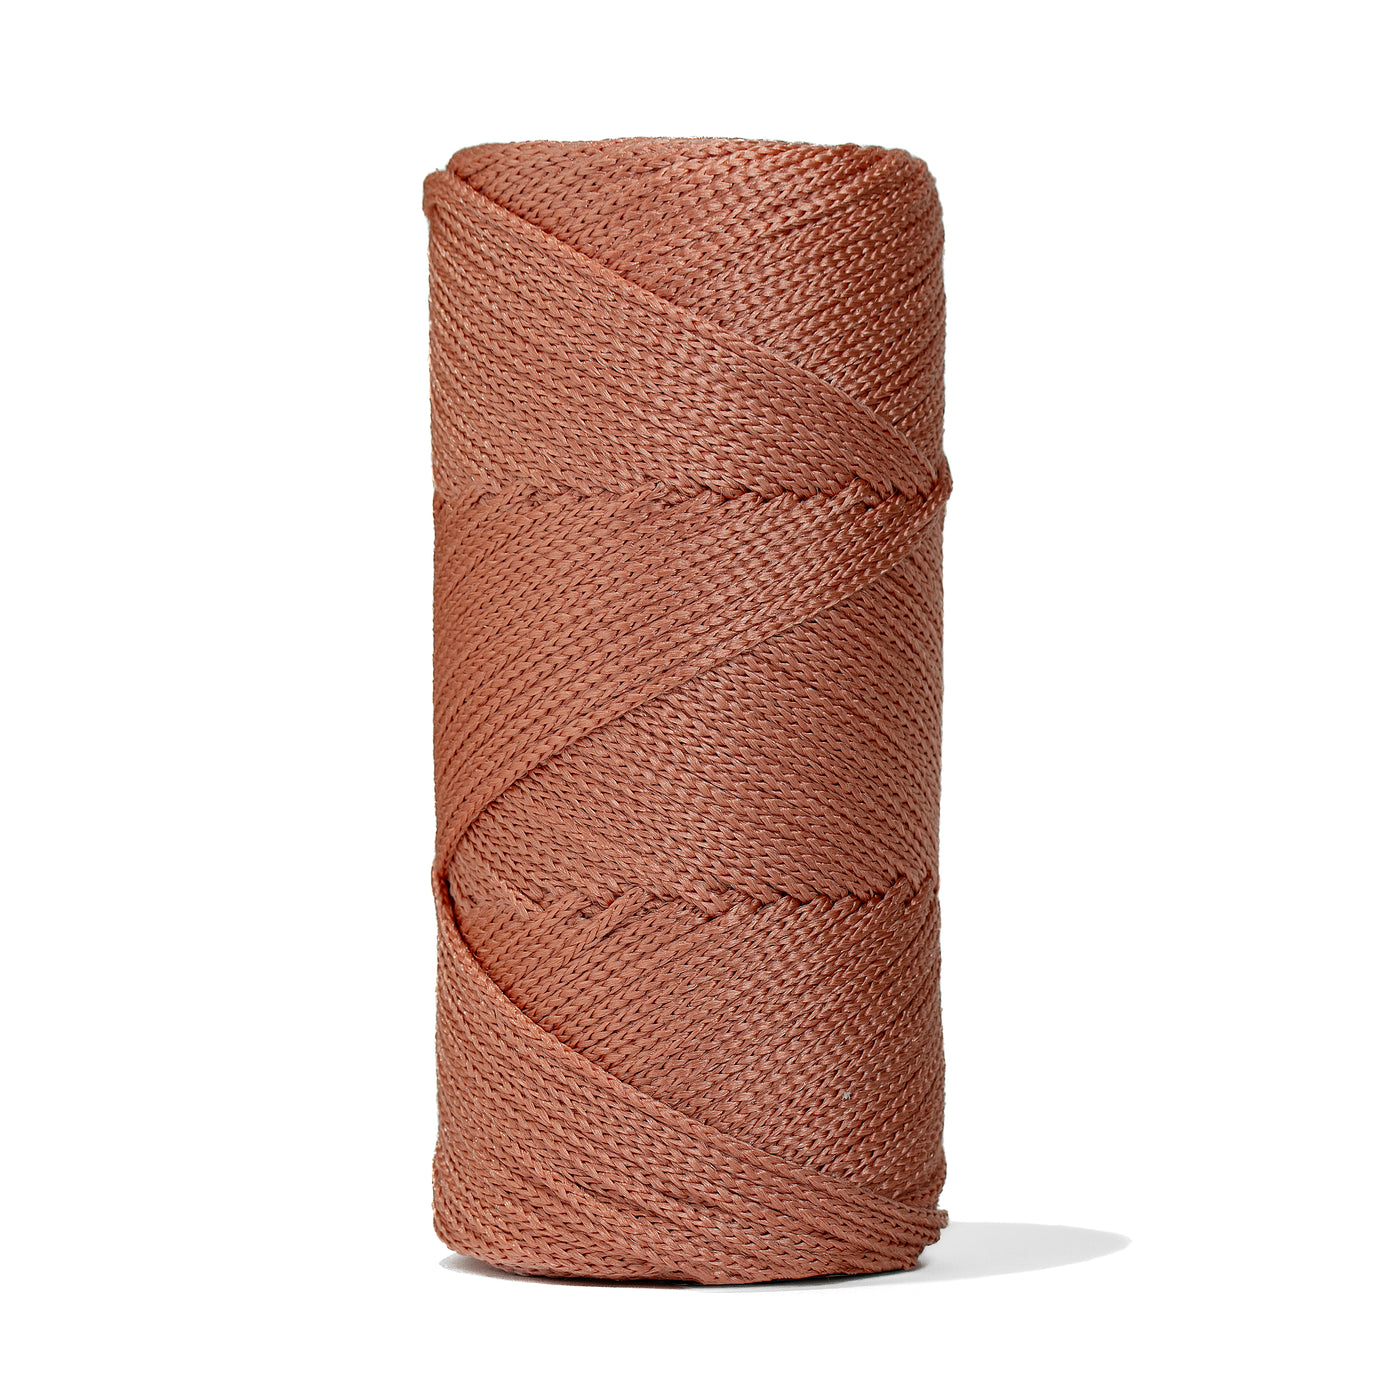 Outdoor 3 mm Macrame Braided Cord – Salmon Color